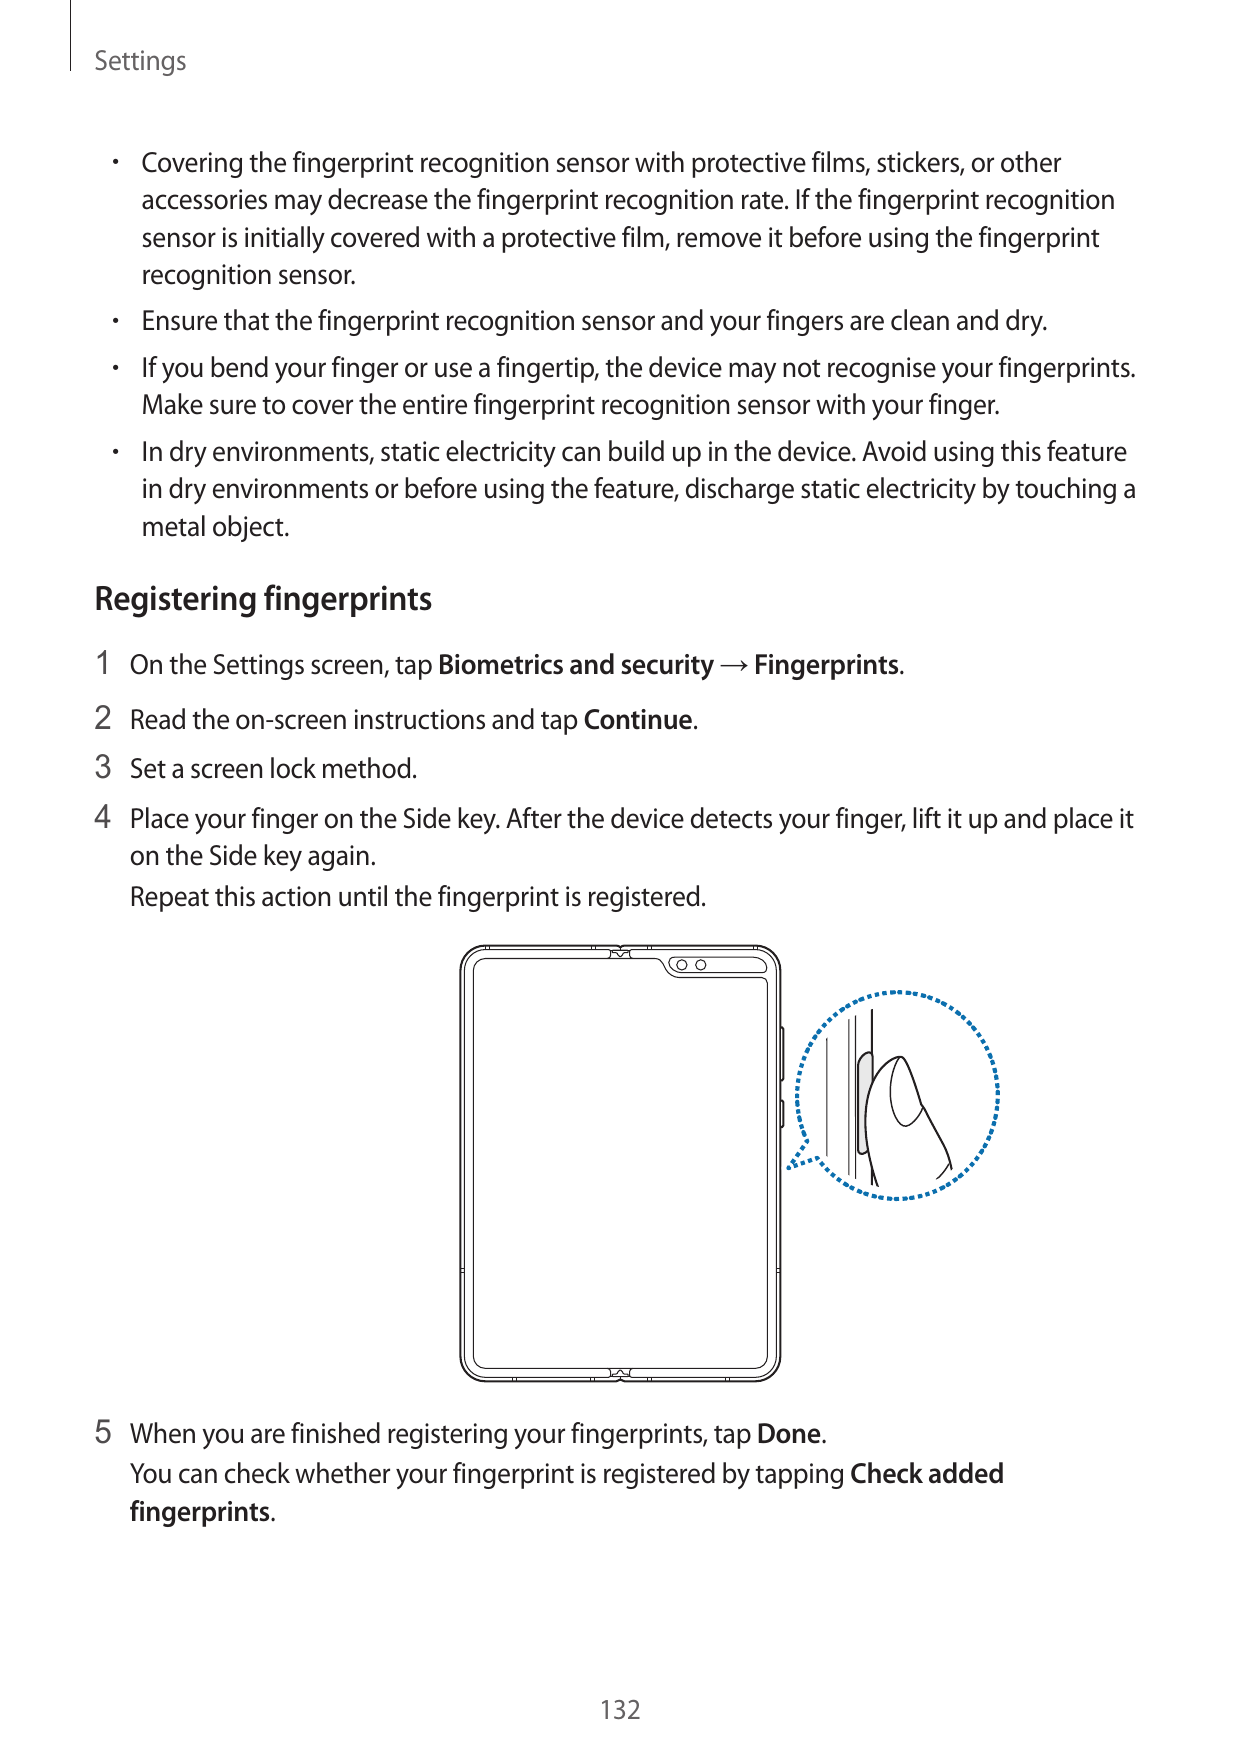 Settings• Covering the fingerprint recognition sensor with protective films, stickers, or otheraccessories may decrease the fing